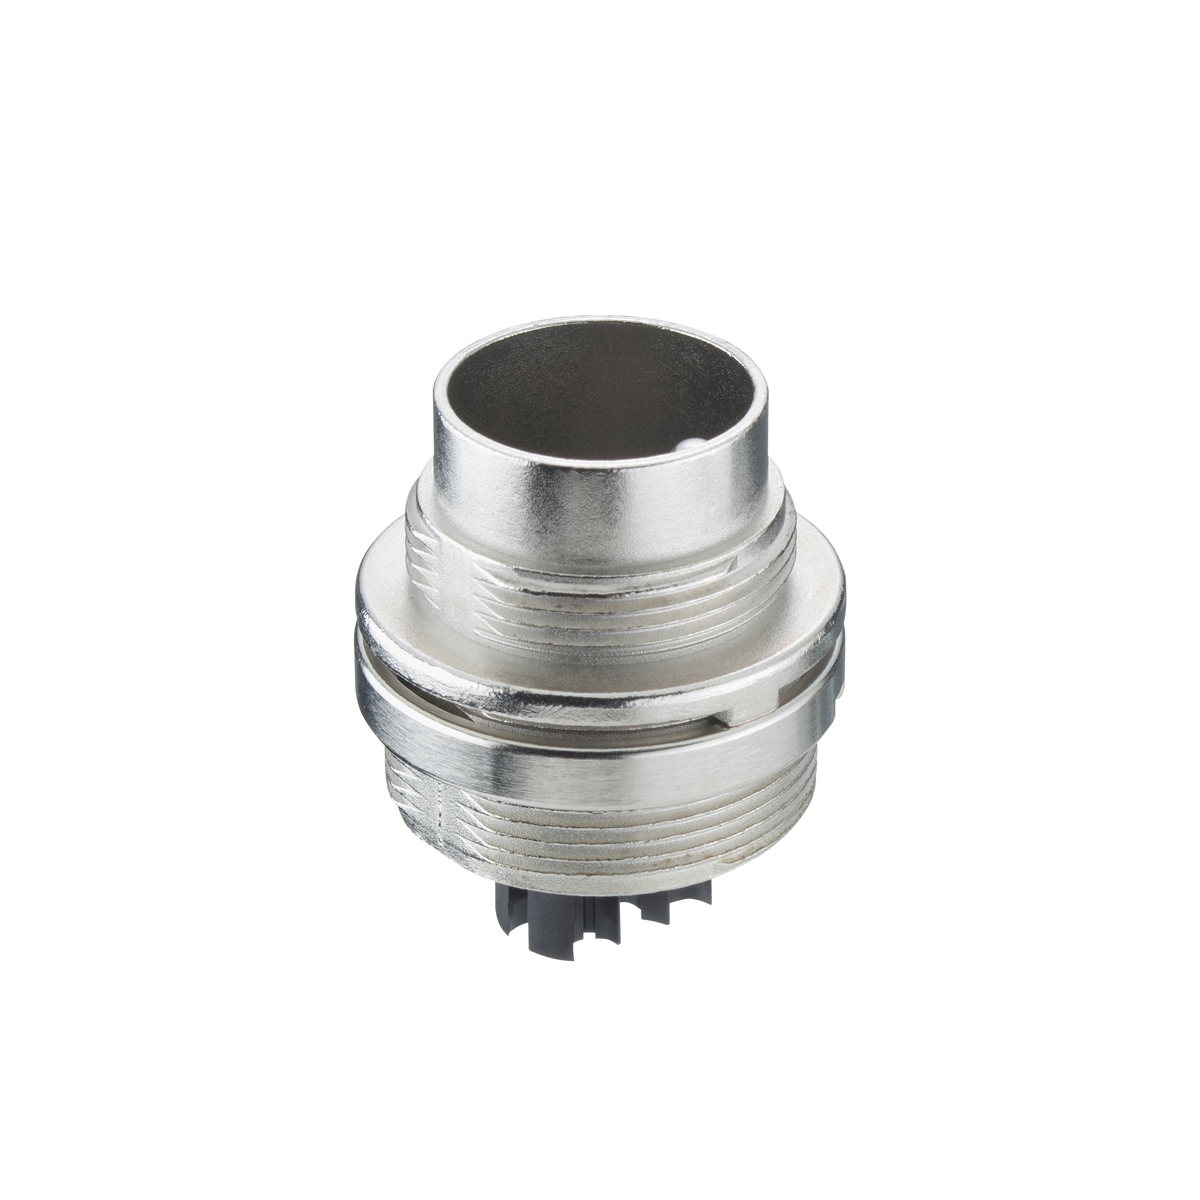 Lumberg: SFV ... C (Series 03 | Circular connectors with threaded joint M16 acc. to IEC 61076-2-106, IP40/IP68)